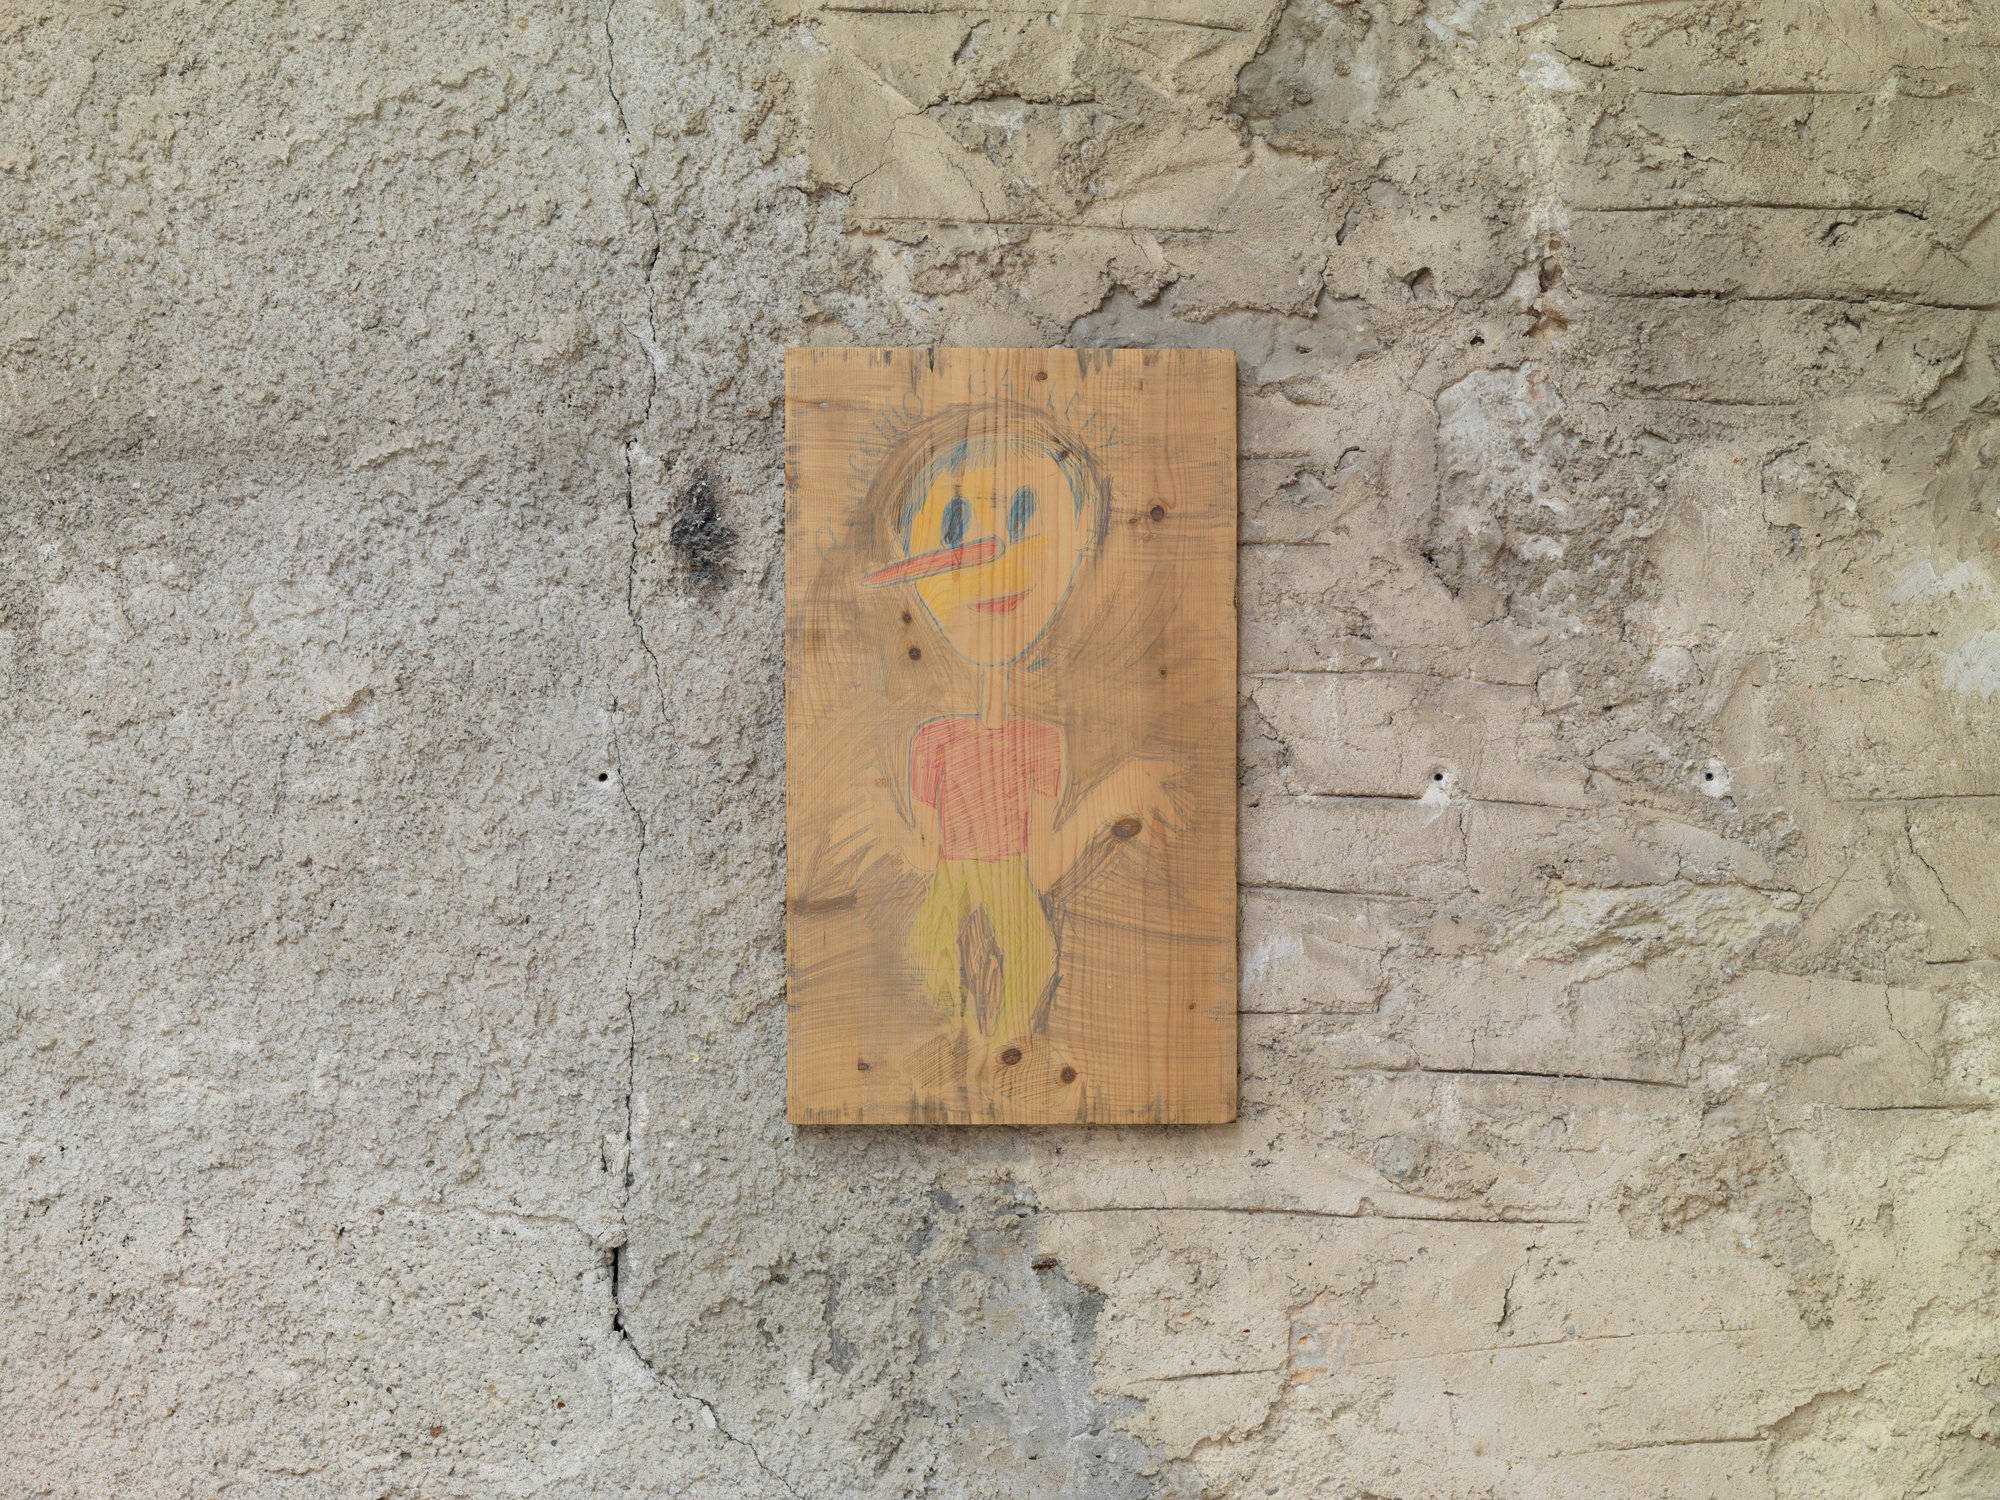 Sidsel Meineche Hansen, Gallery Pinocchio, crayon drawing on found selph, 56 x 33 cm (22 x 13 in), 2020